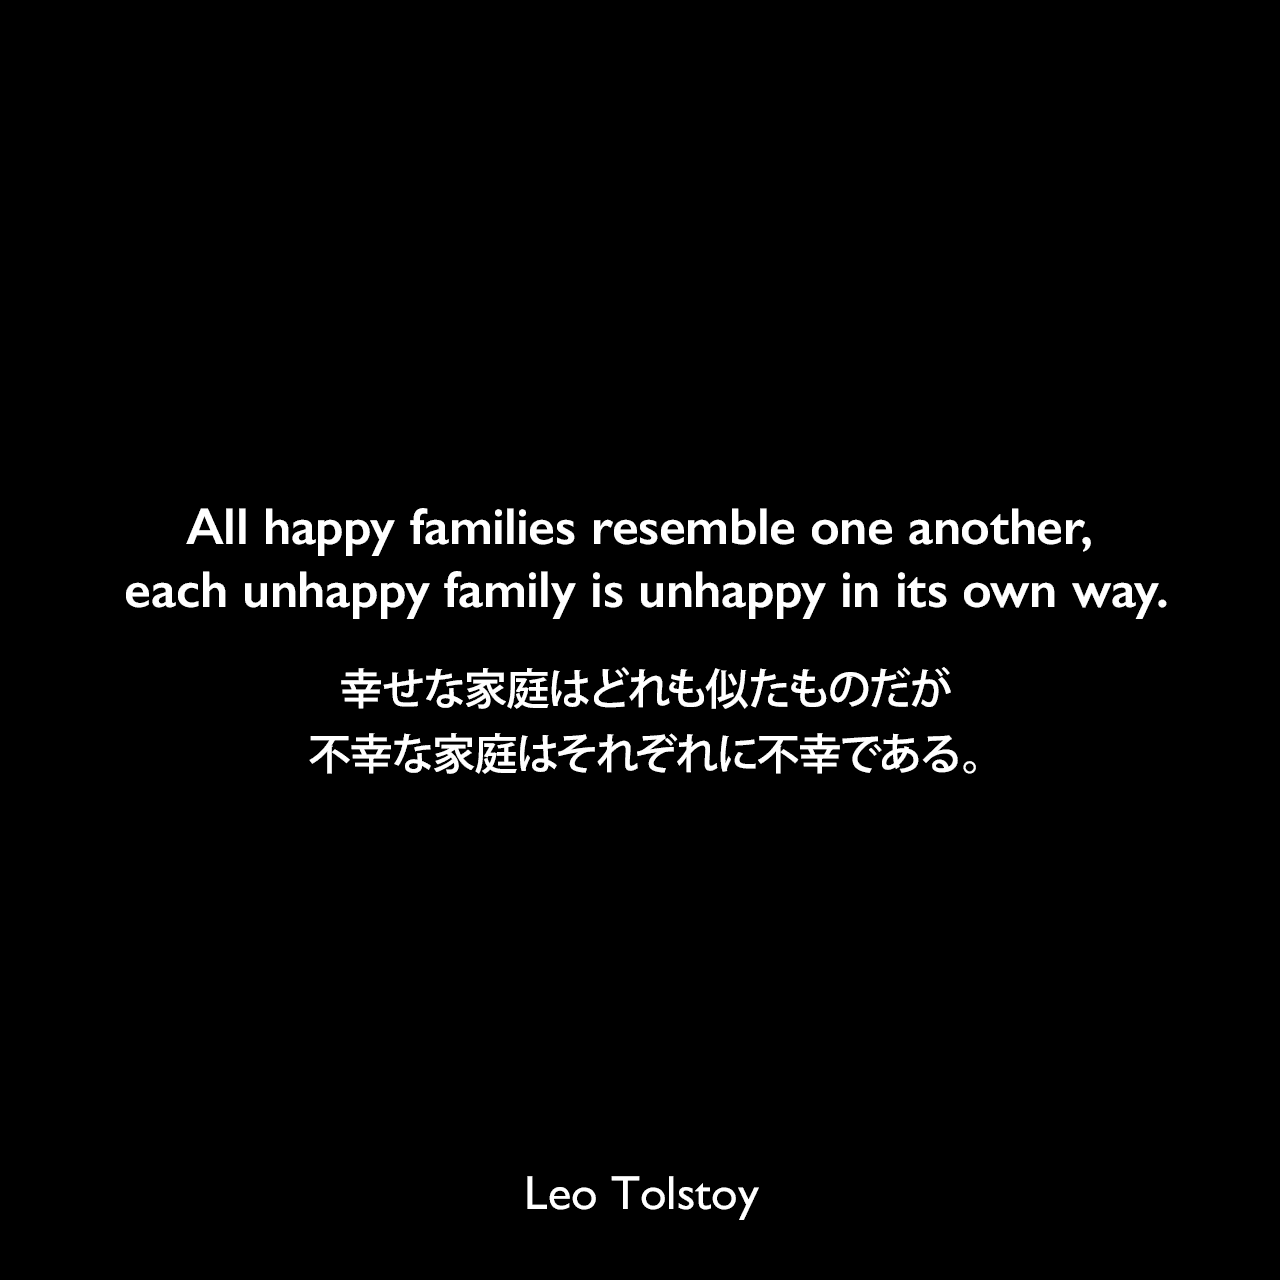 All happy families resemble one another, each unhappy family is unhappy in its own way.幸せな家庭はどれも似たものだが、不幸な家庭はそれぞれに不幸である。- トルストイによる小説「アンナ・カレーニナ」よりLeo Tolstoy